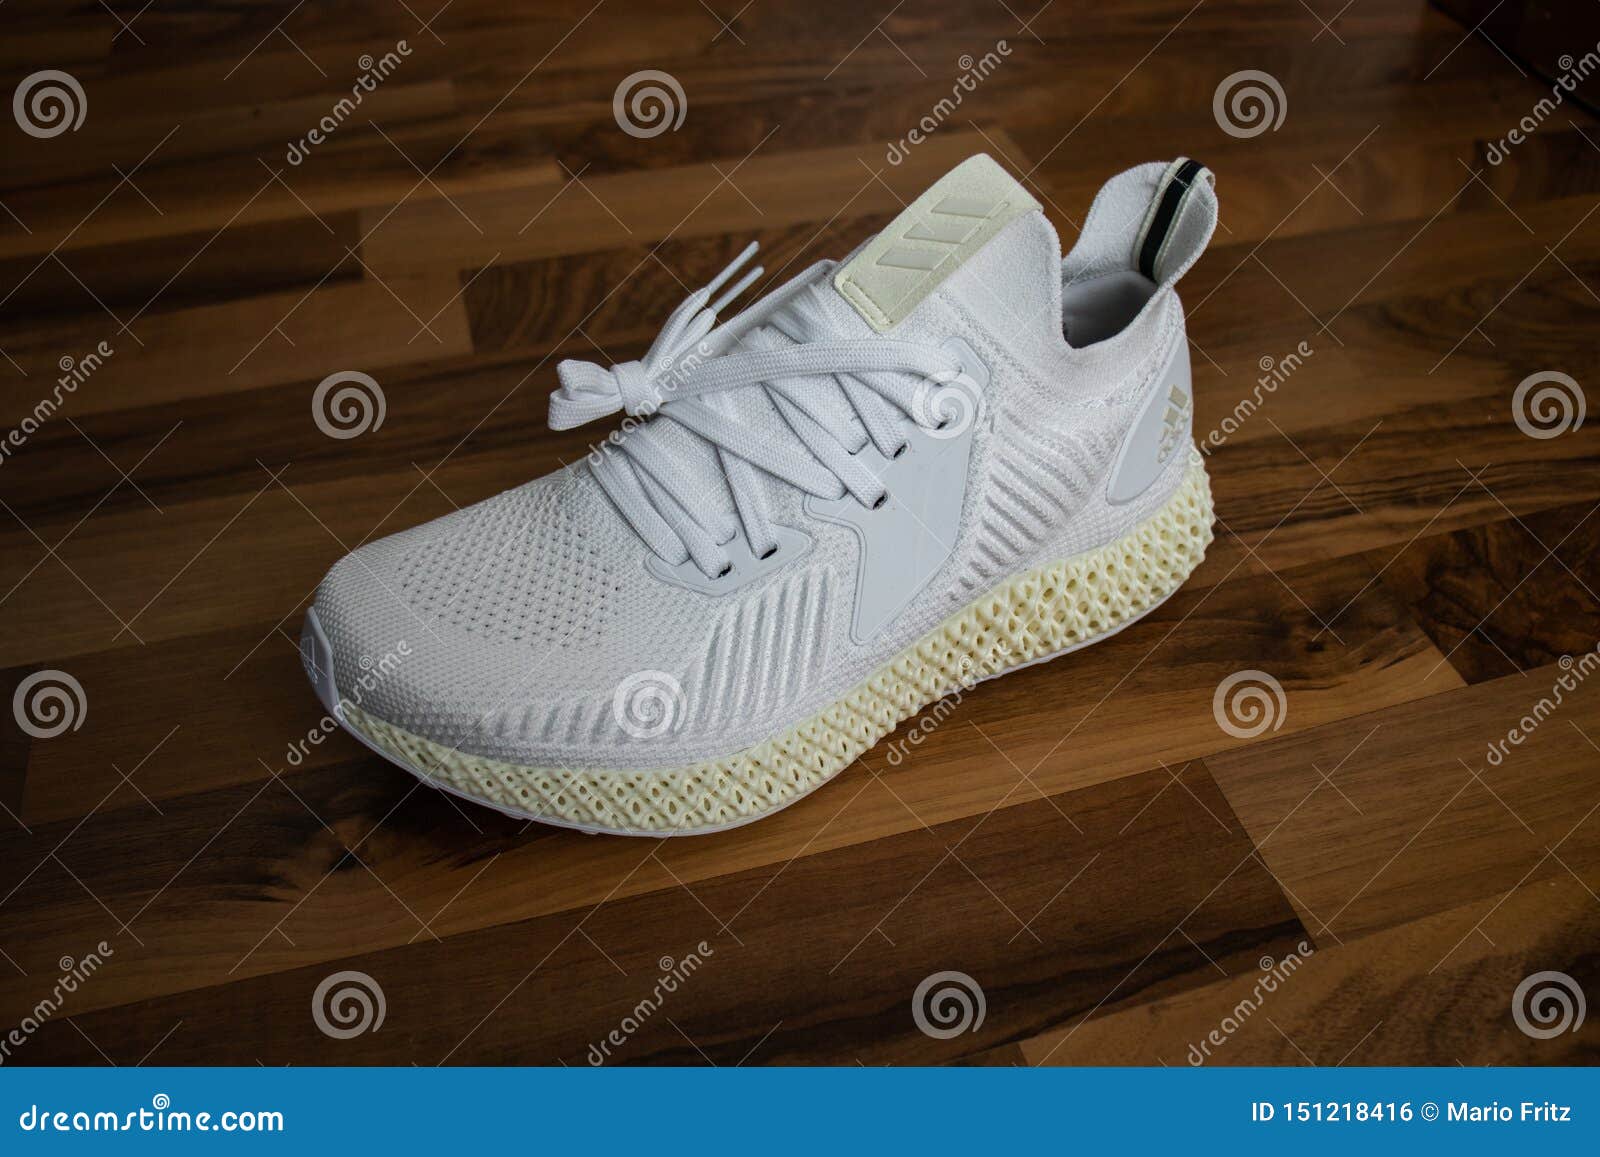 yellow and white adidas shoes